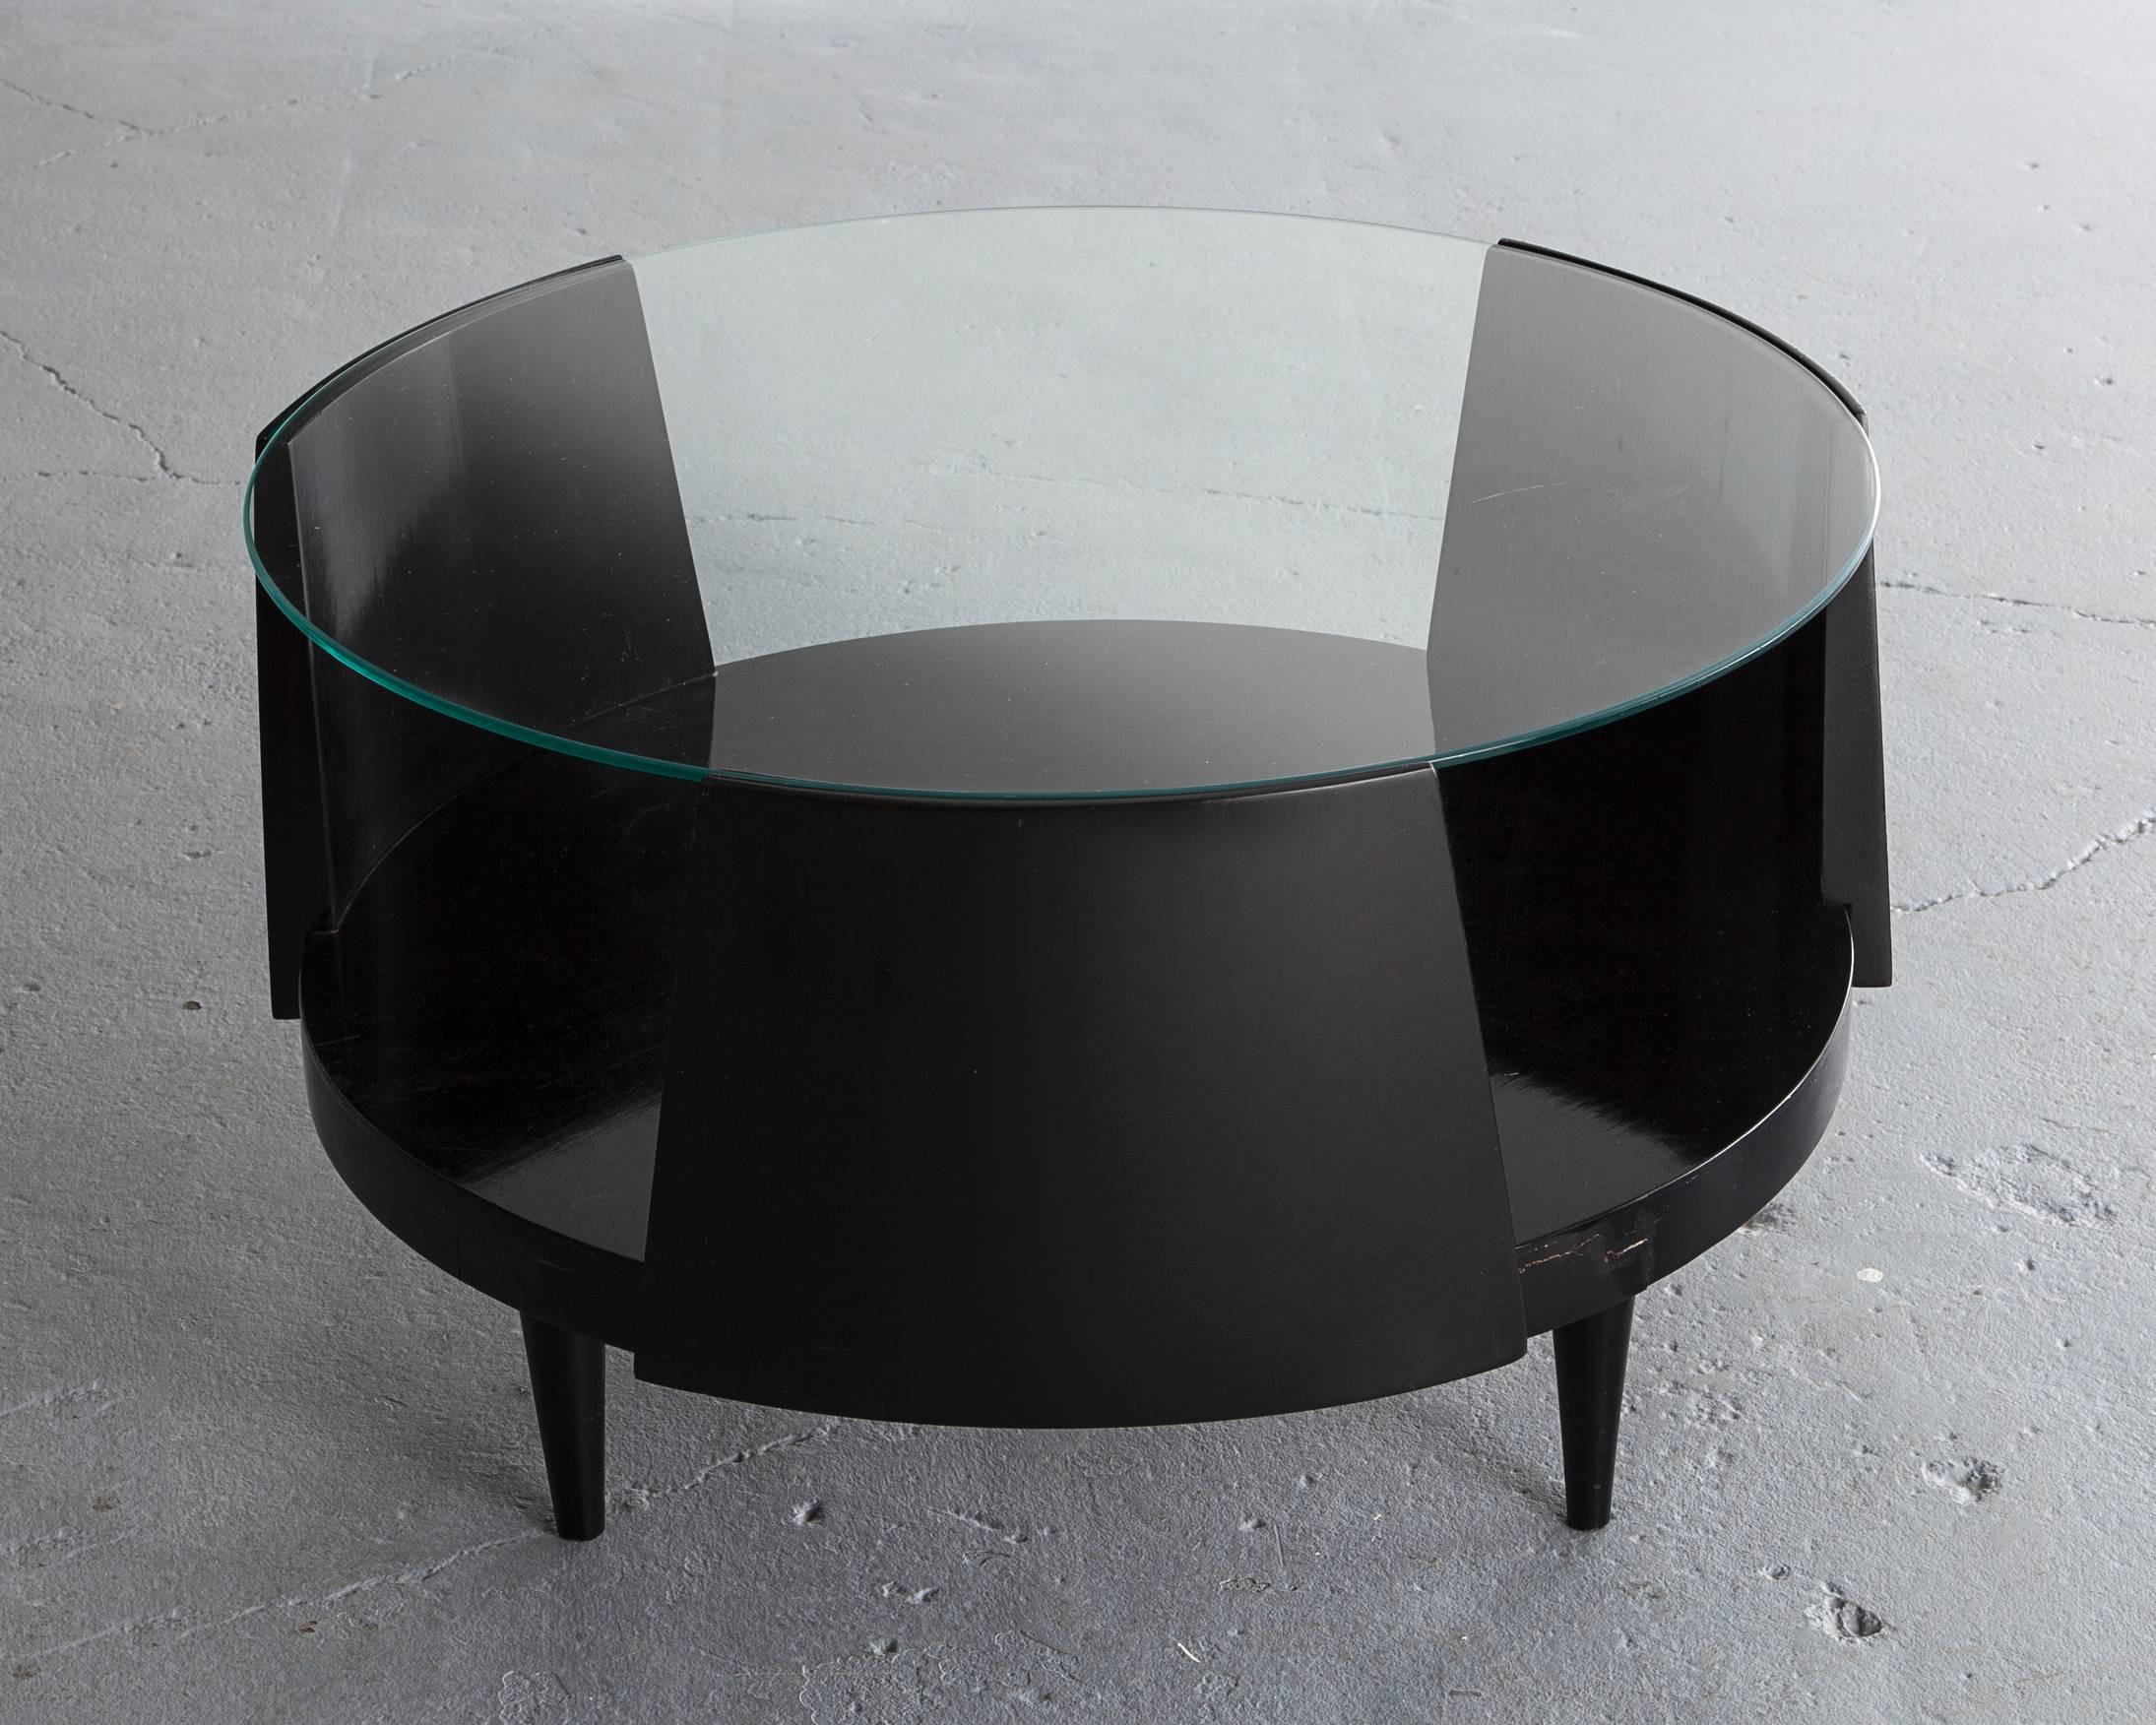 Round coffee table in ebonized wood with glass top. Designed by Martin Eisler and Susi Aczel for Forma, Brazil, 1950s.